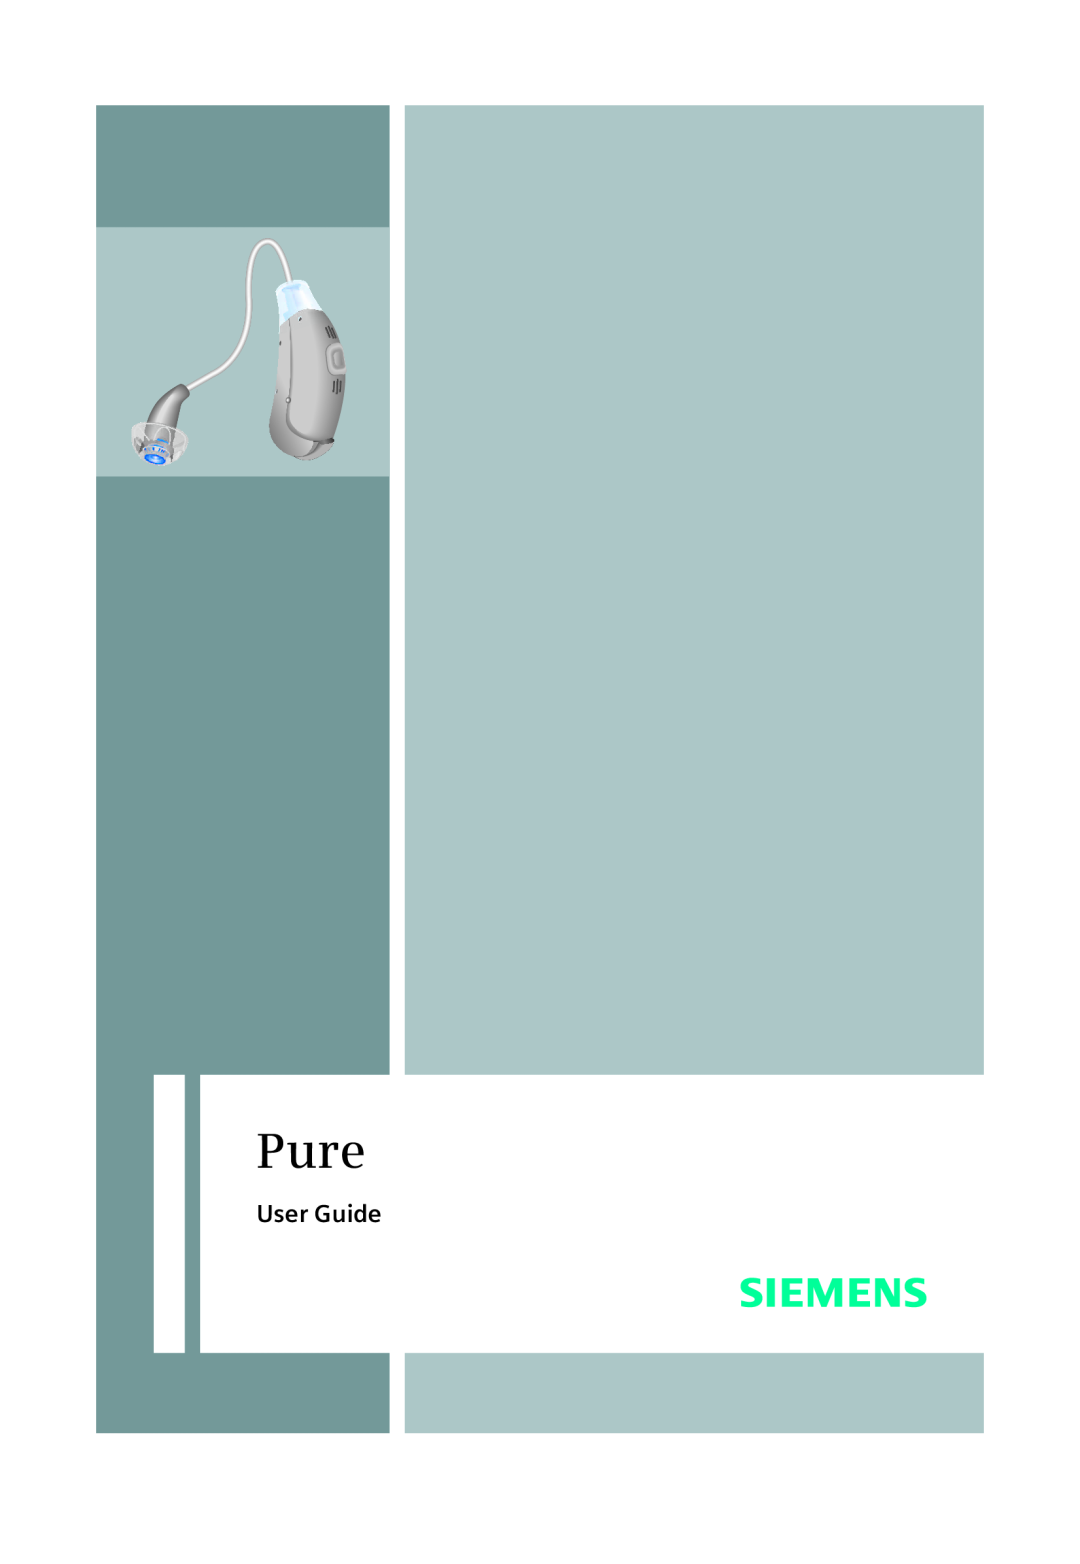 Siemens manual Gigaset S1 professional in HiPath Cordless Office, HiPath 500 V2.0 or later, Operating Manual 